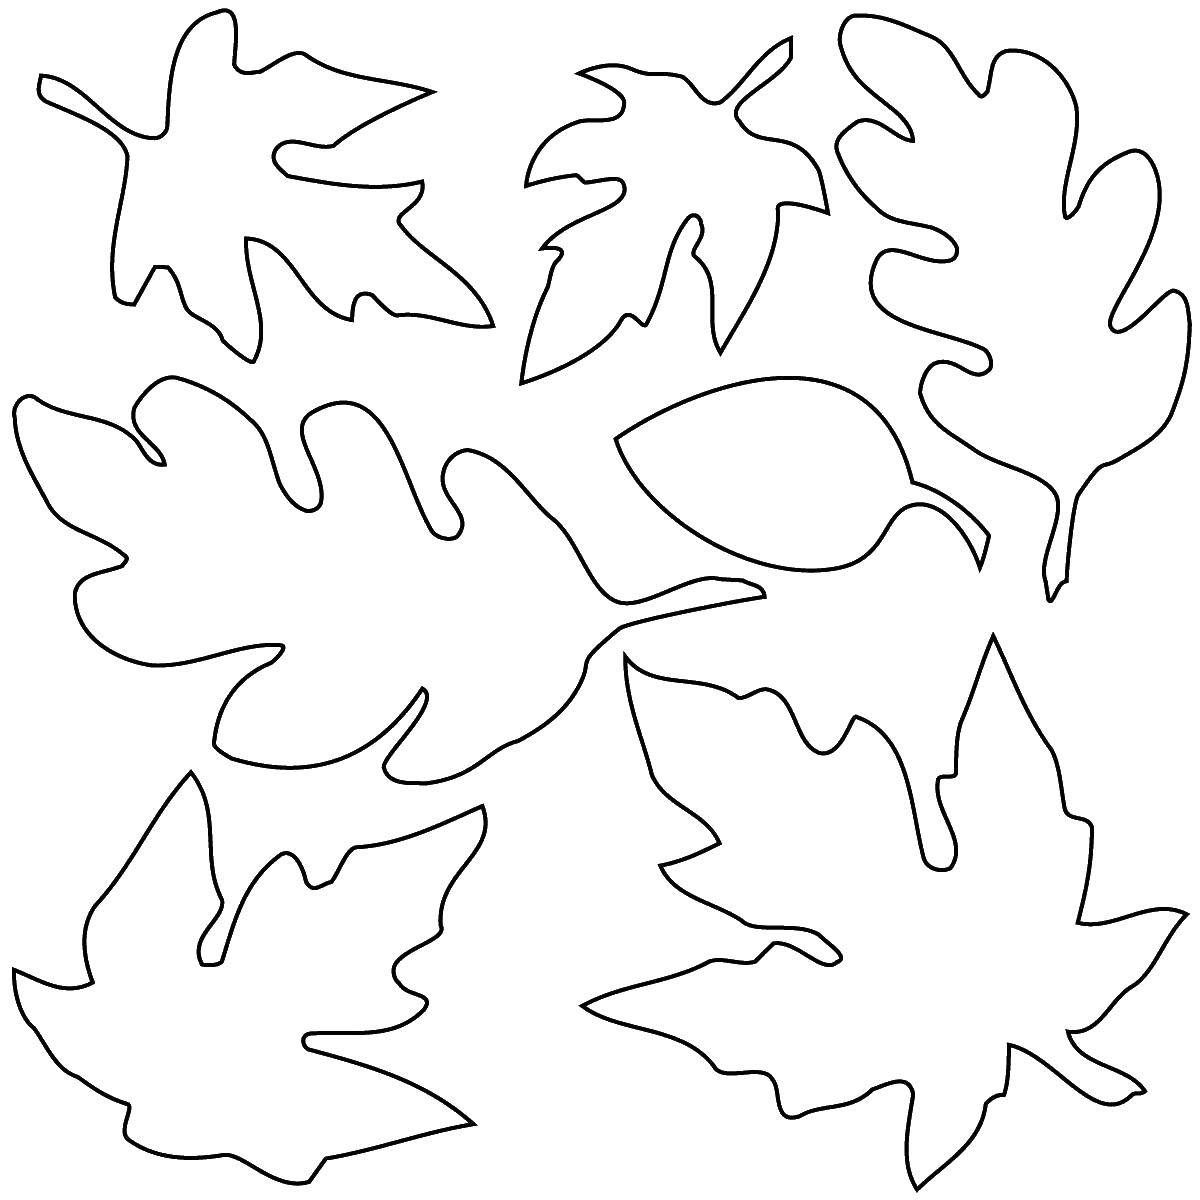 Coloring The contours of the leaves. Category The contours of the leaves. Tags:  leaves, contours.